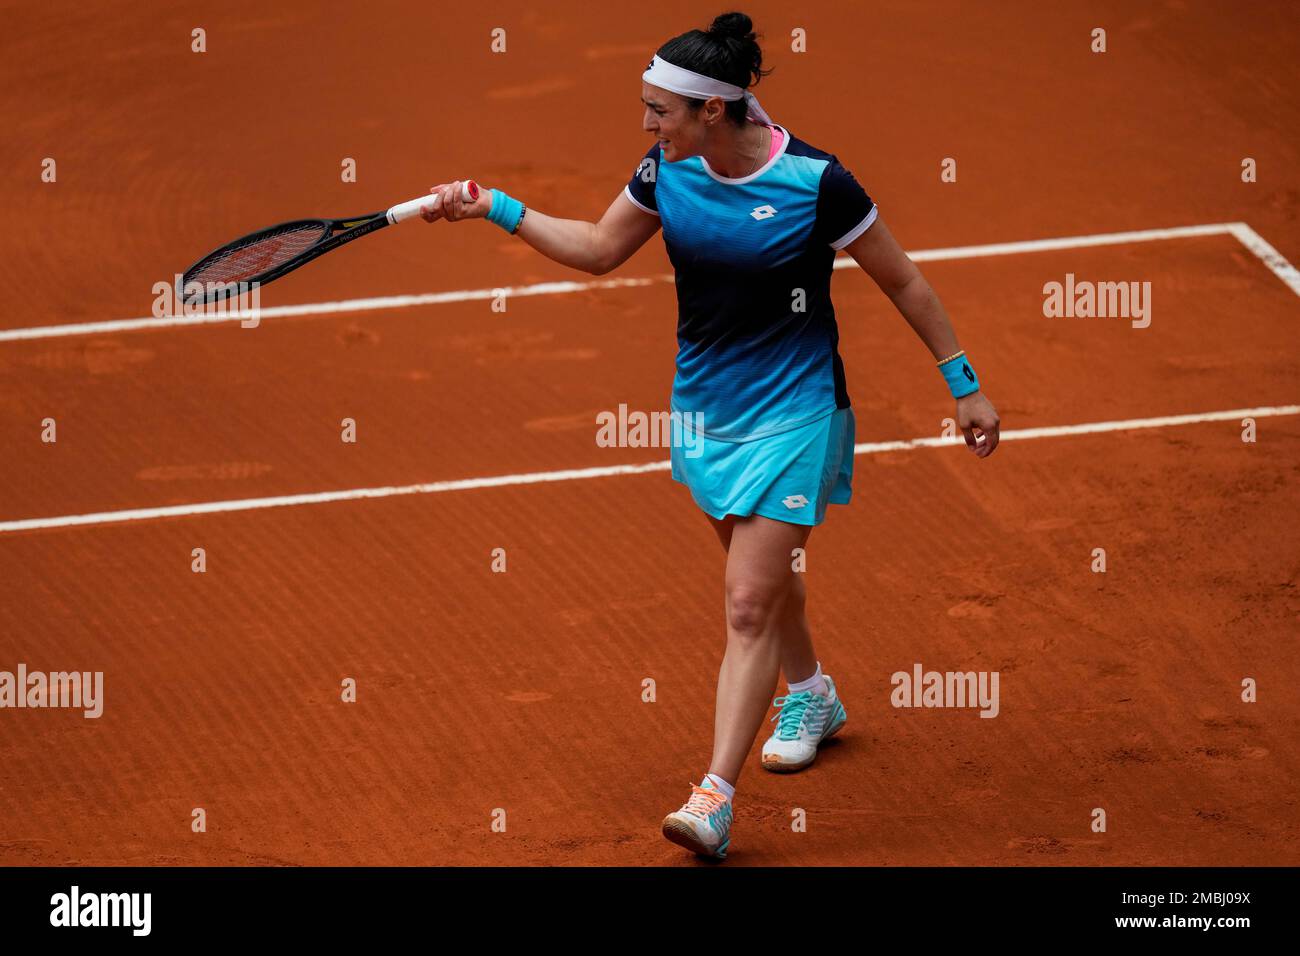 Ons Jabeur, of Tunisia, reacts during a match against Belinda Bencic, of  Switzerland, at the Mutua Madrid Open tennis tournament in Madrid, Monday,  May 2, 2022. (AP Photo/Bernat Armangue Stock Photo - Alamy